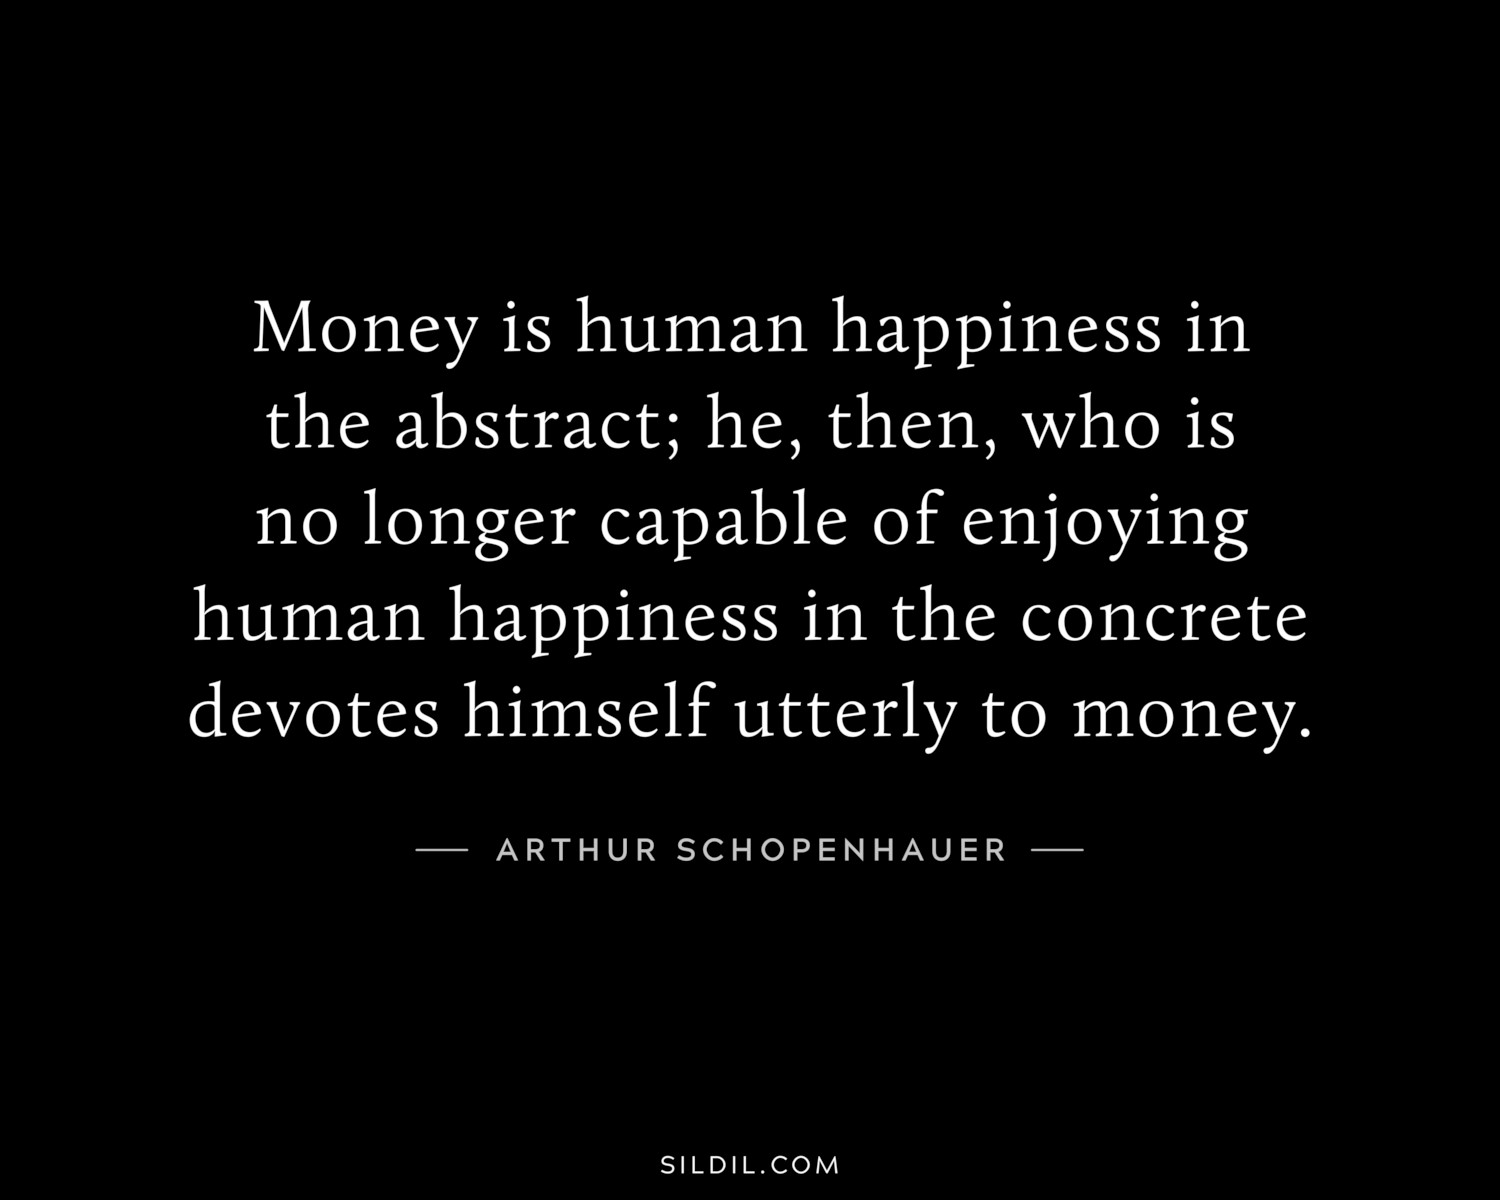 Money is human happiness in the abstract; he, then, who is no longer capable of enjoying human happiness in the concrete devotes himself utterly to money.